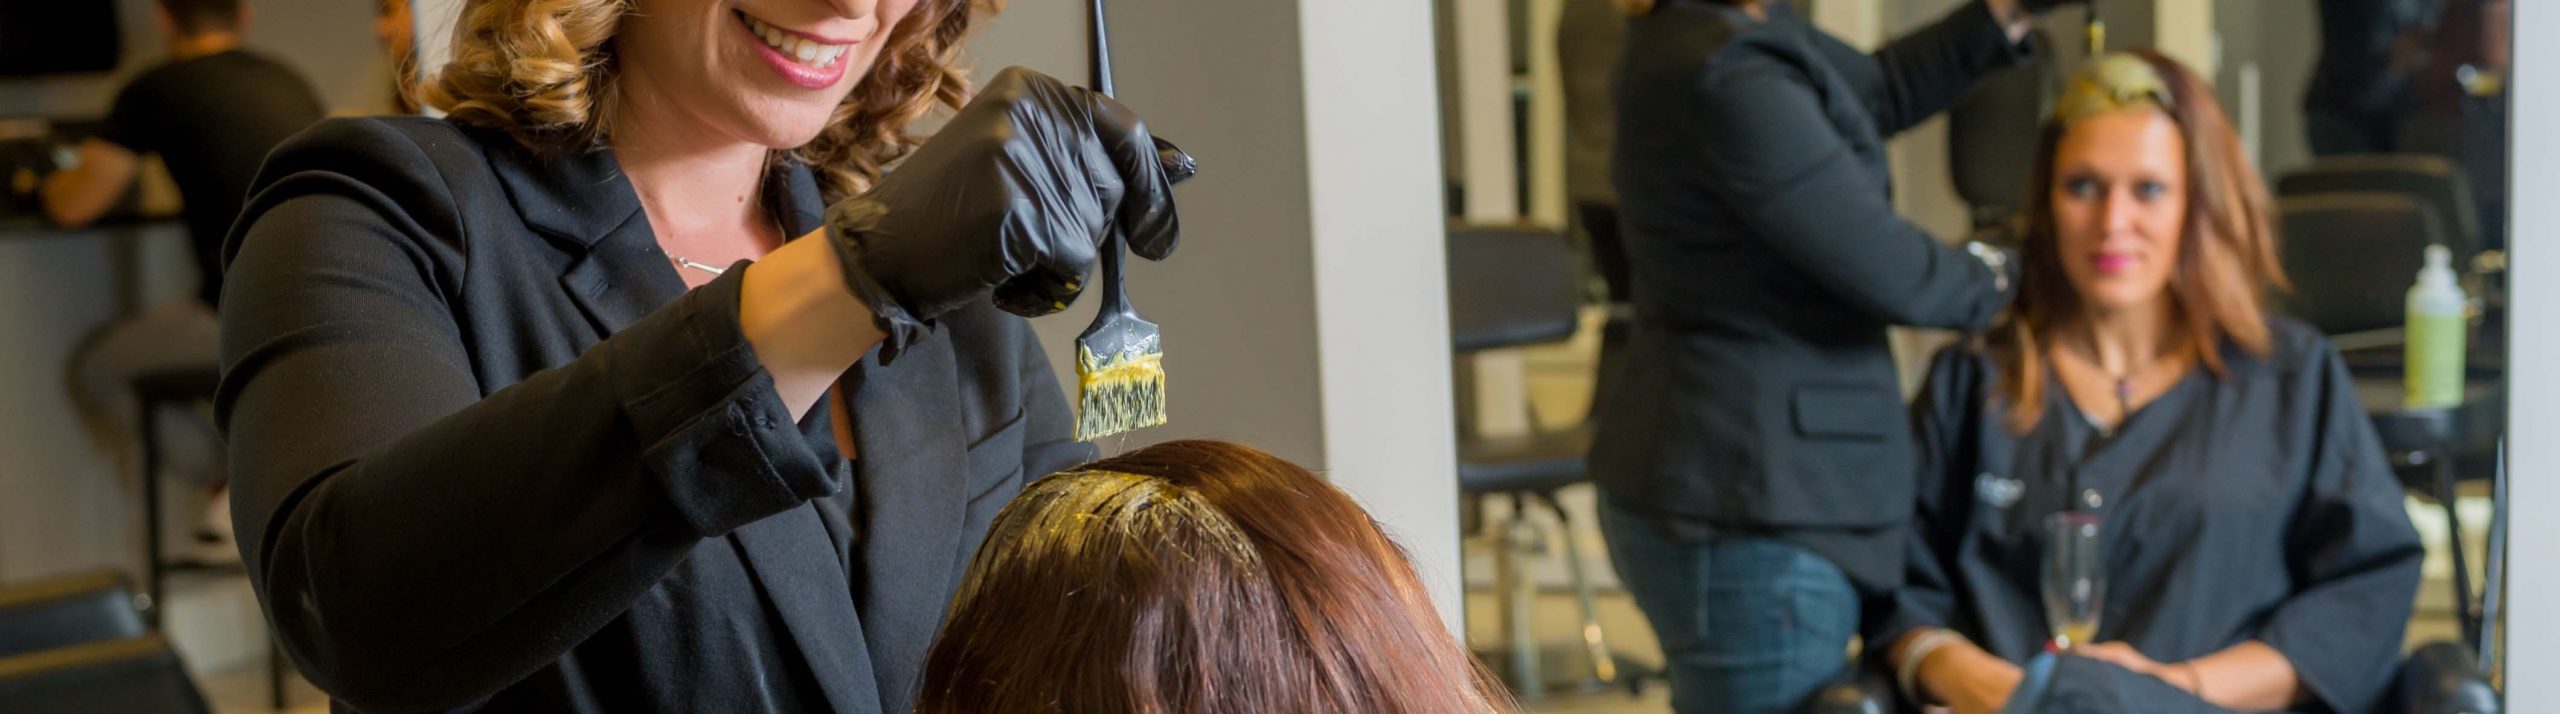 Woman Dying another Woman's Roots at a Naples Salon